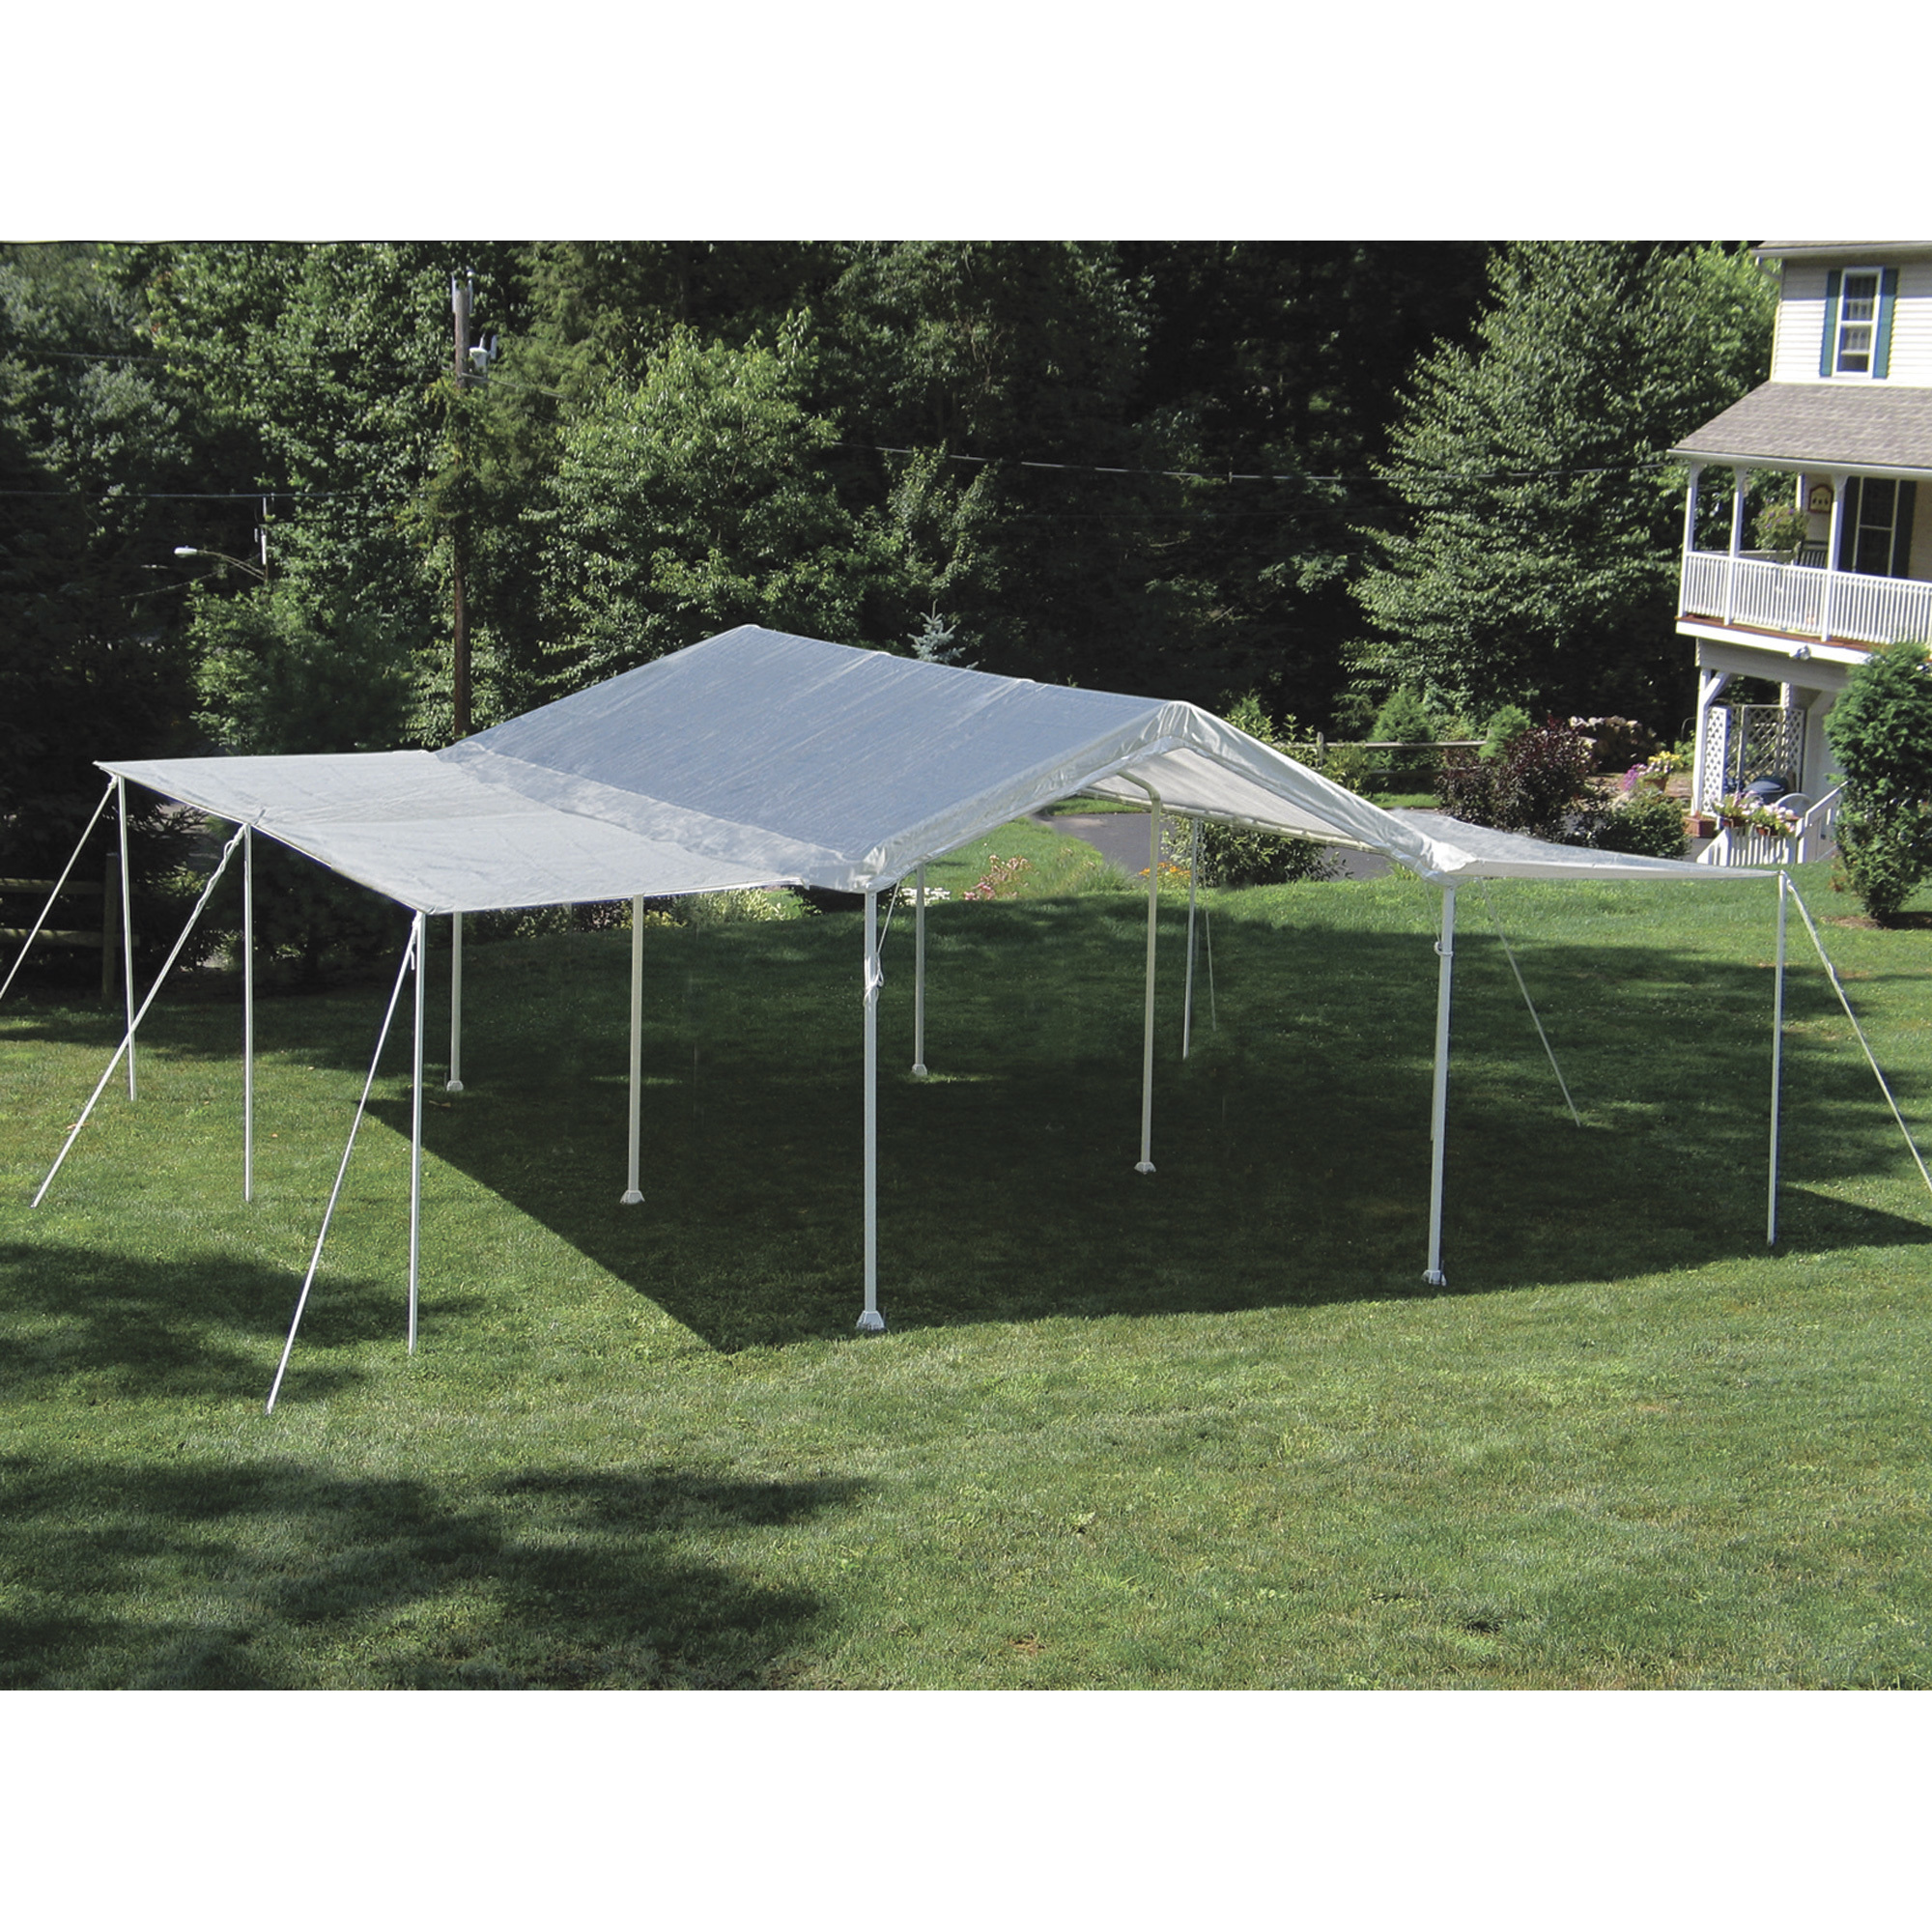 ShelterLogic 2-in-1 MaxAP Outdoor Canopy Tent, 20ft.L x 10ft.W, White, Model 25715